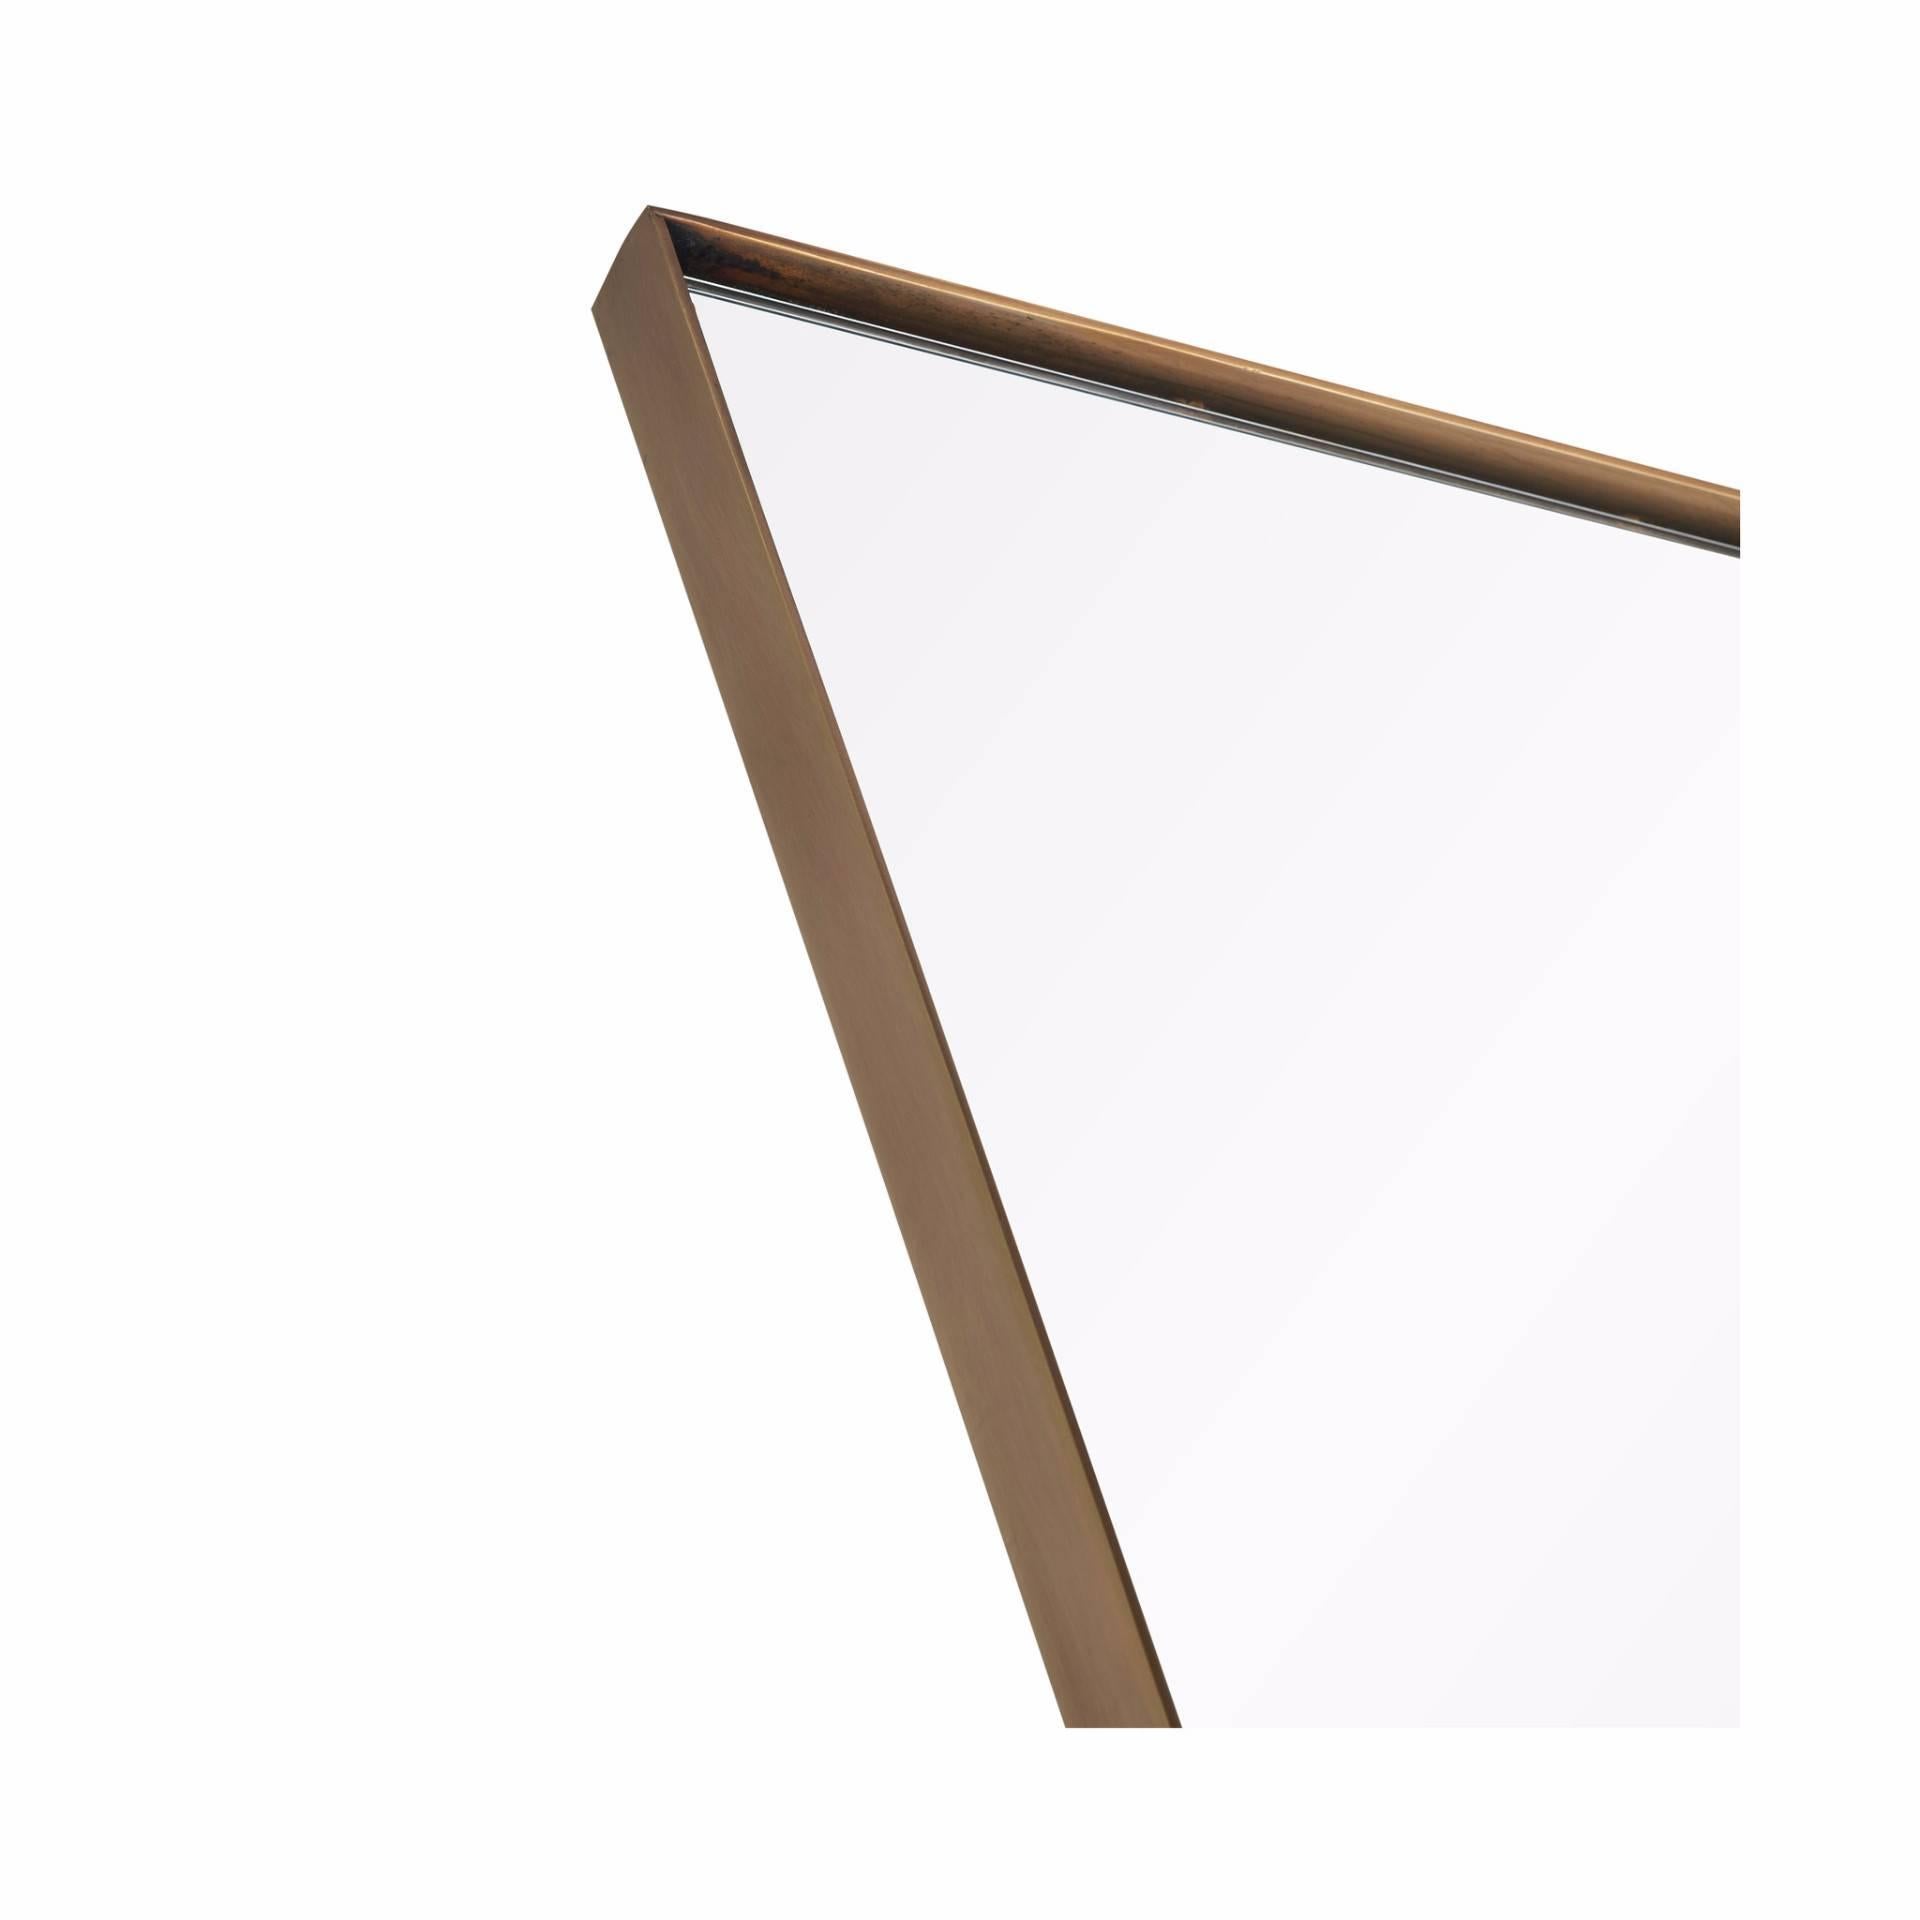 Italian modern inspired mirror series available in an antique brass finish.